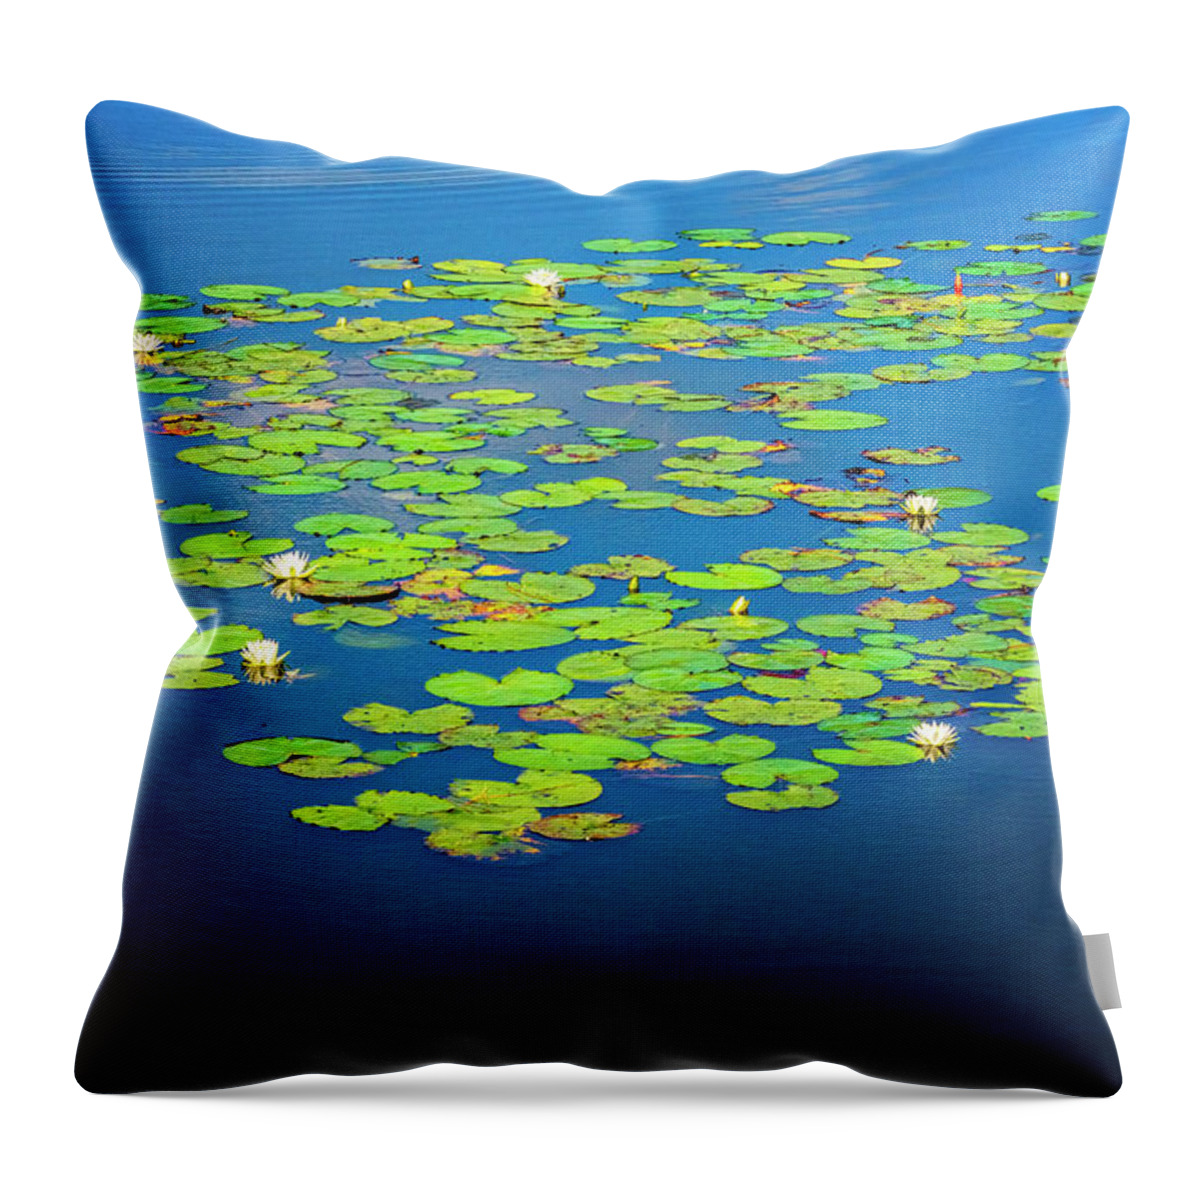 North Port Florida Throw Pillow featuring the photograph Lily Pads by Tom Singleton